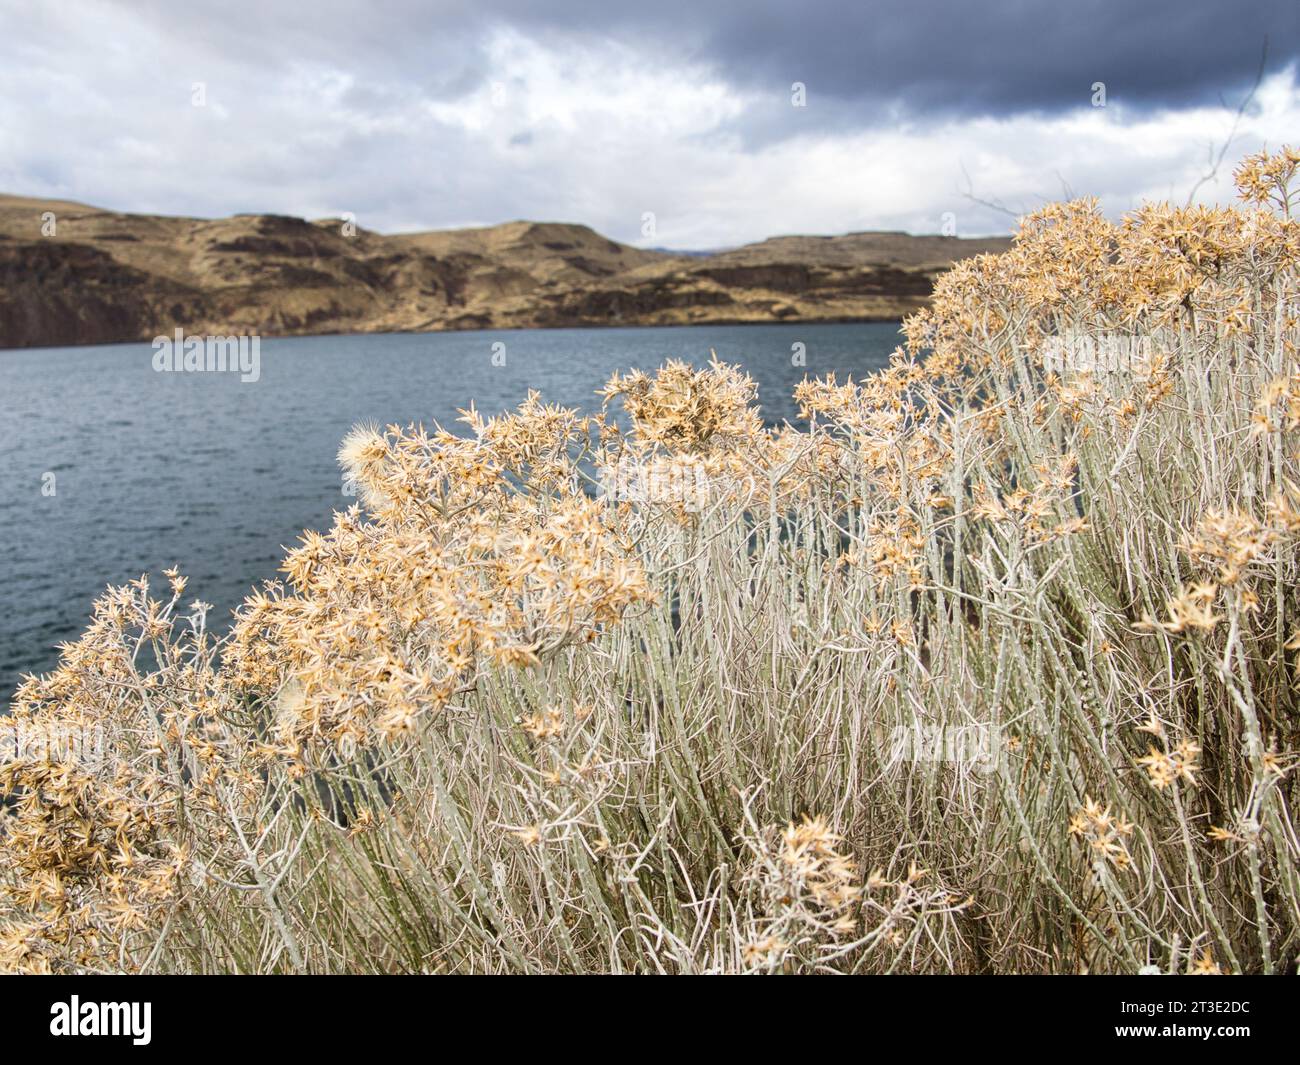 Dramatic image of desert coulee landscape across the Columbia River in Eastern Washington, in the Pacific Northwest. Cloudy sky with dried plants. Stock Photo